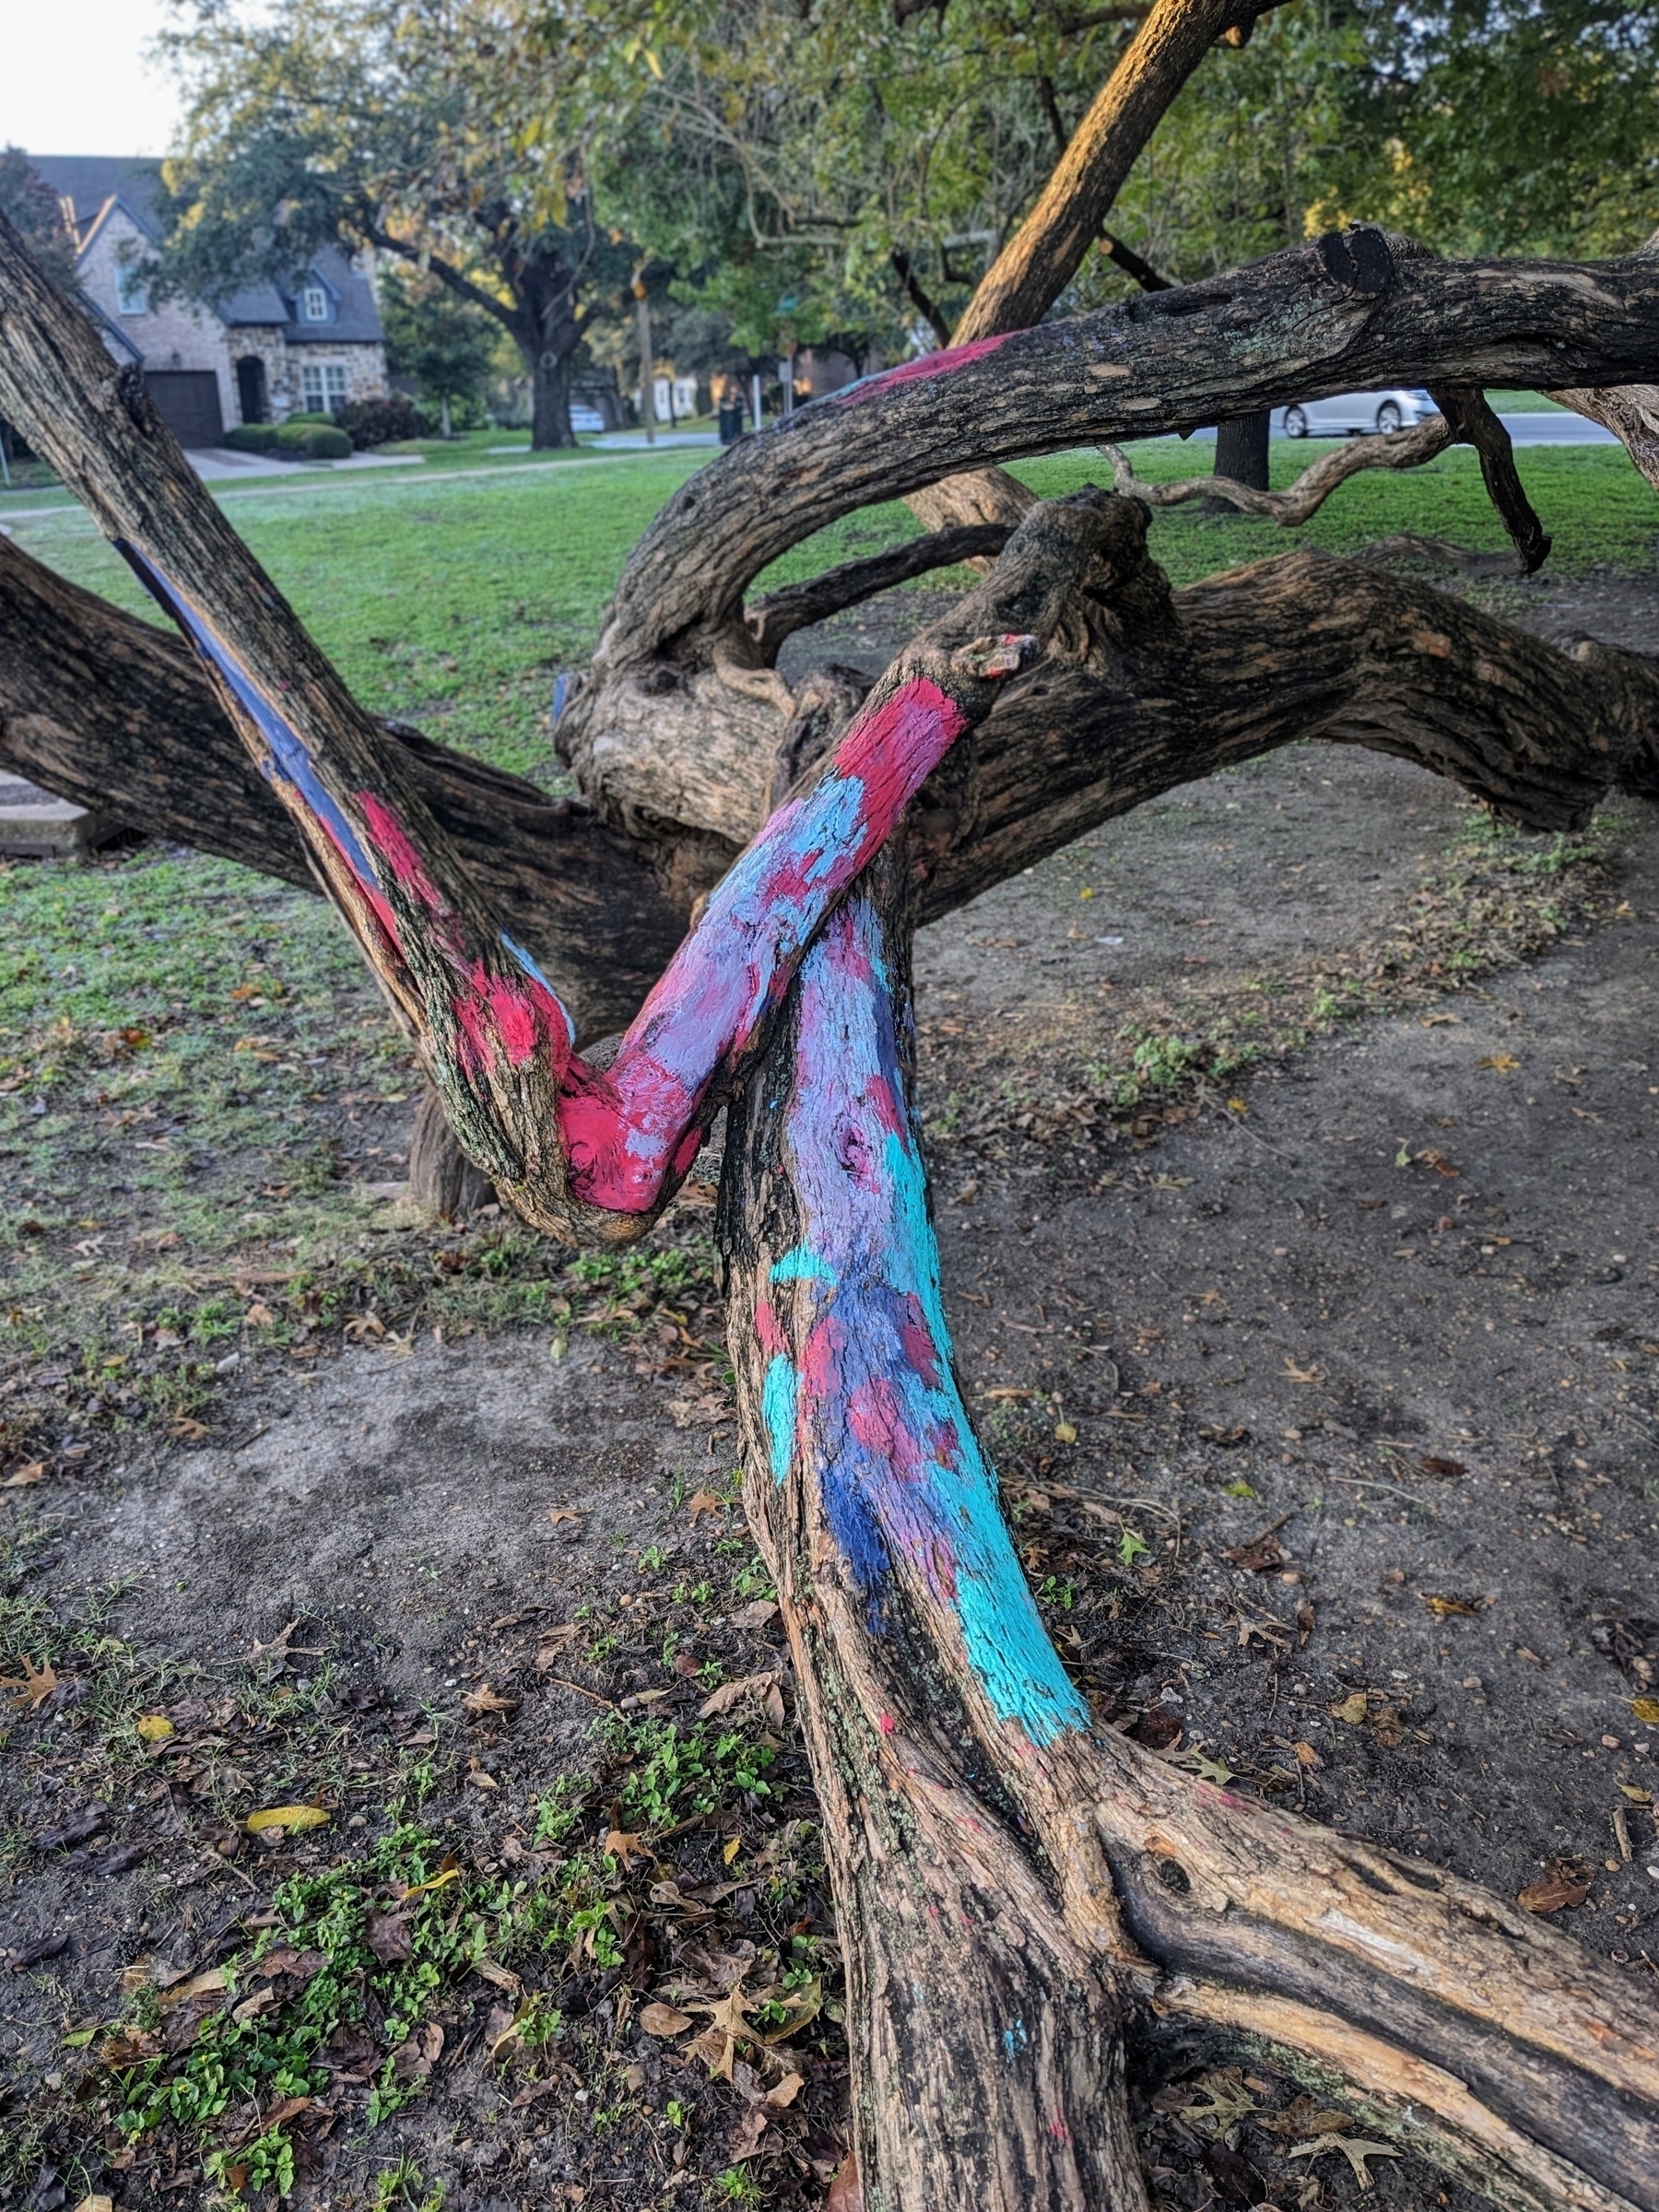 bright blue, red, and pink chalk markings on the branches of a Texas bois d'arc tree in a Dallas park